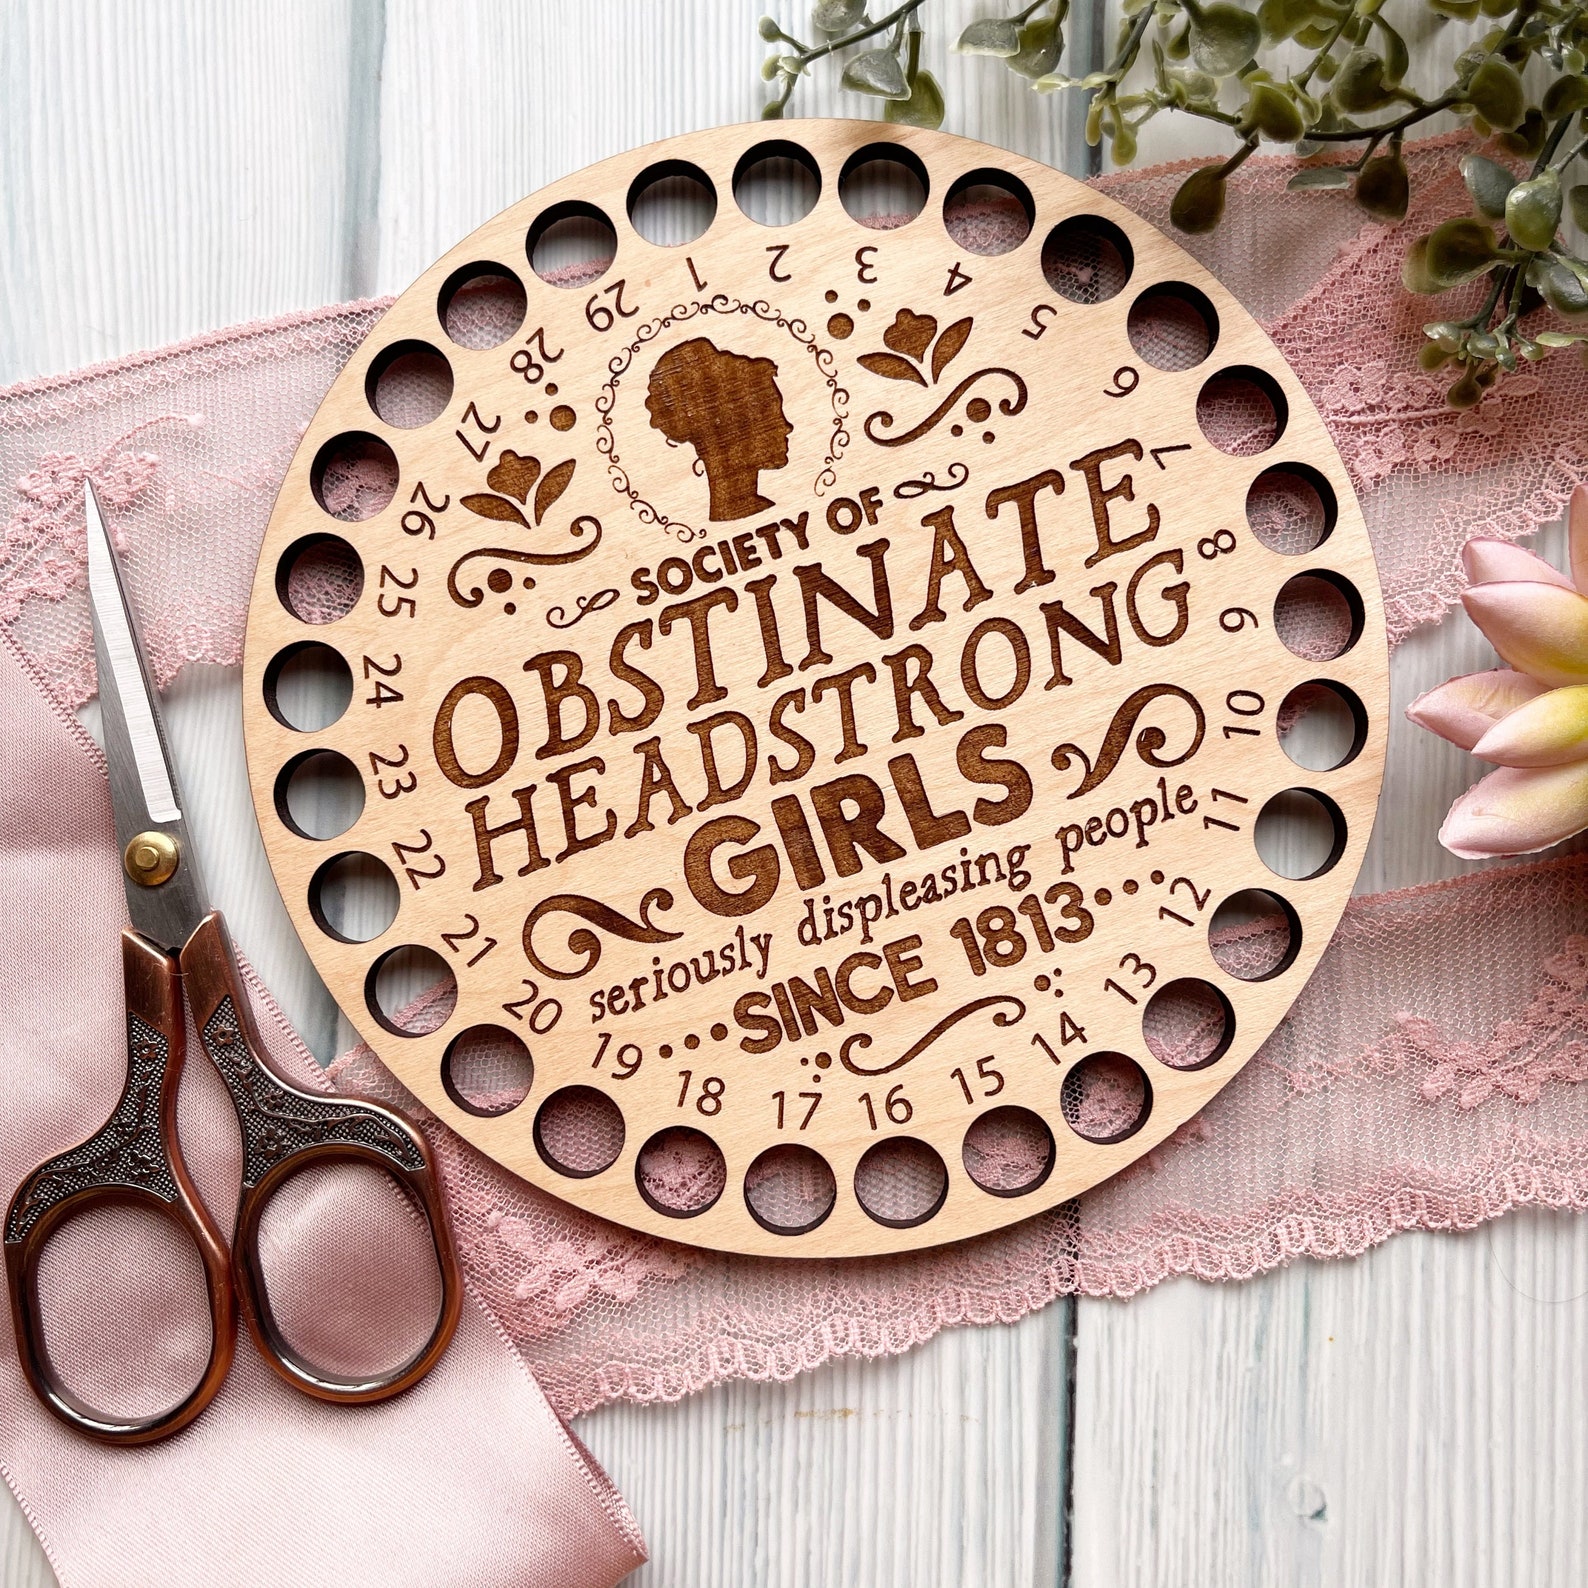 A wood circular thread organizer with "Society of Obstinate headstrong girls" embossed on it.